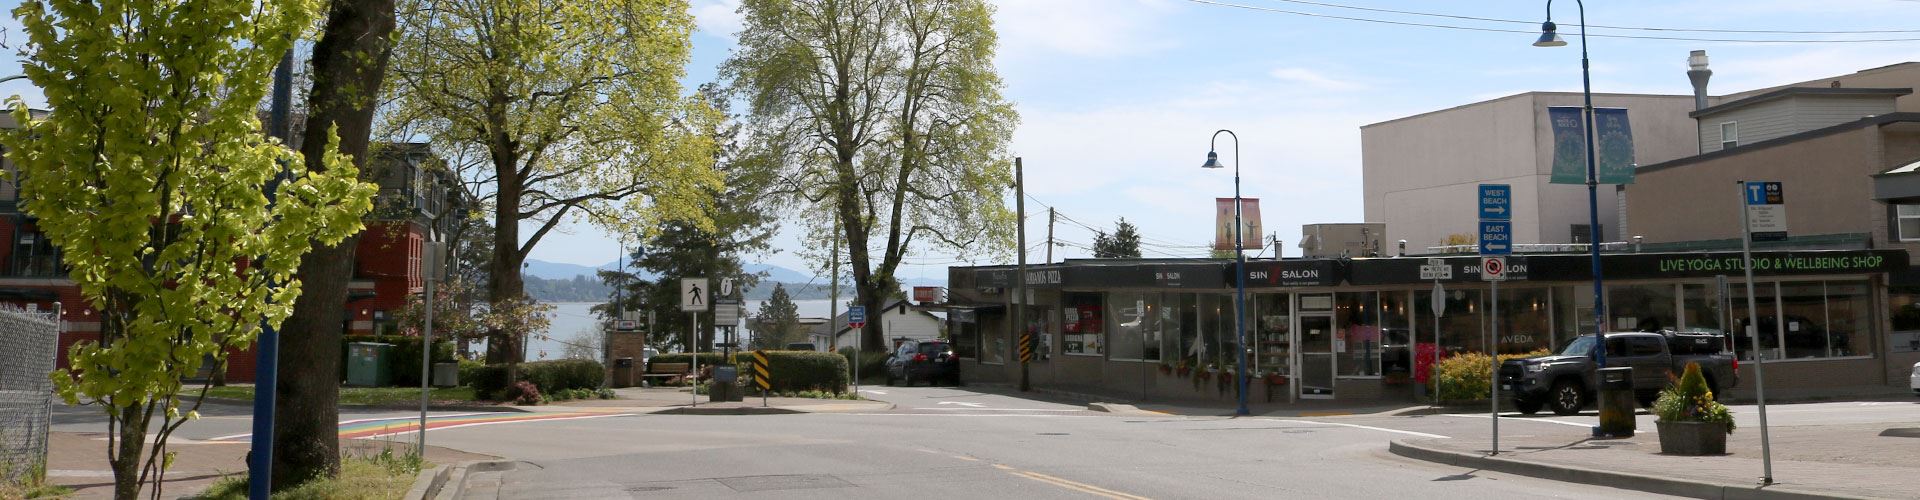 Five Corners shopping and business district in White Rock